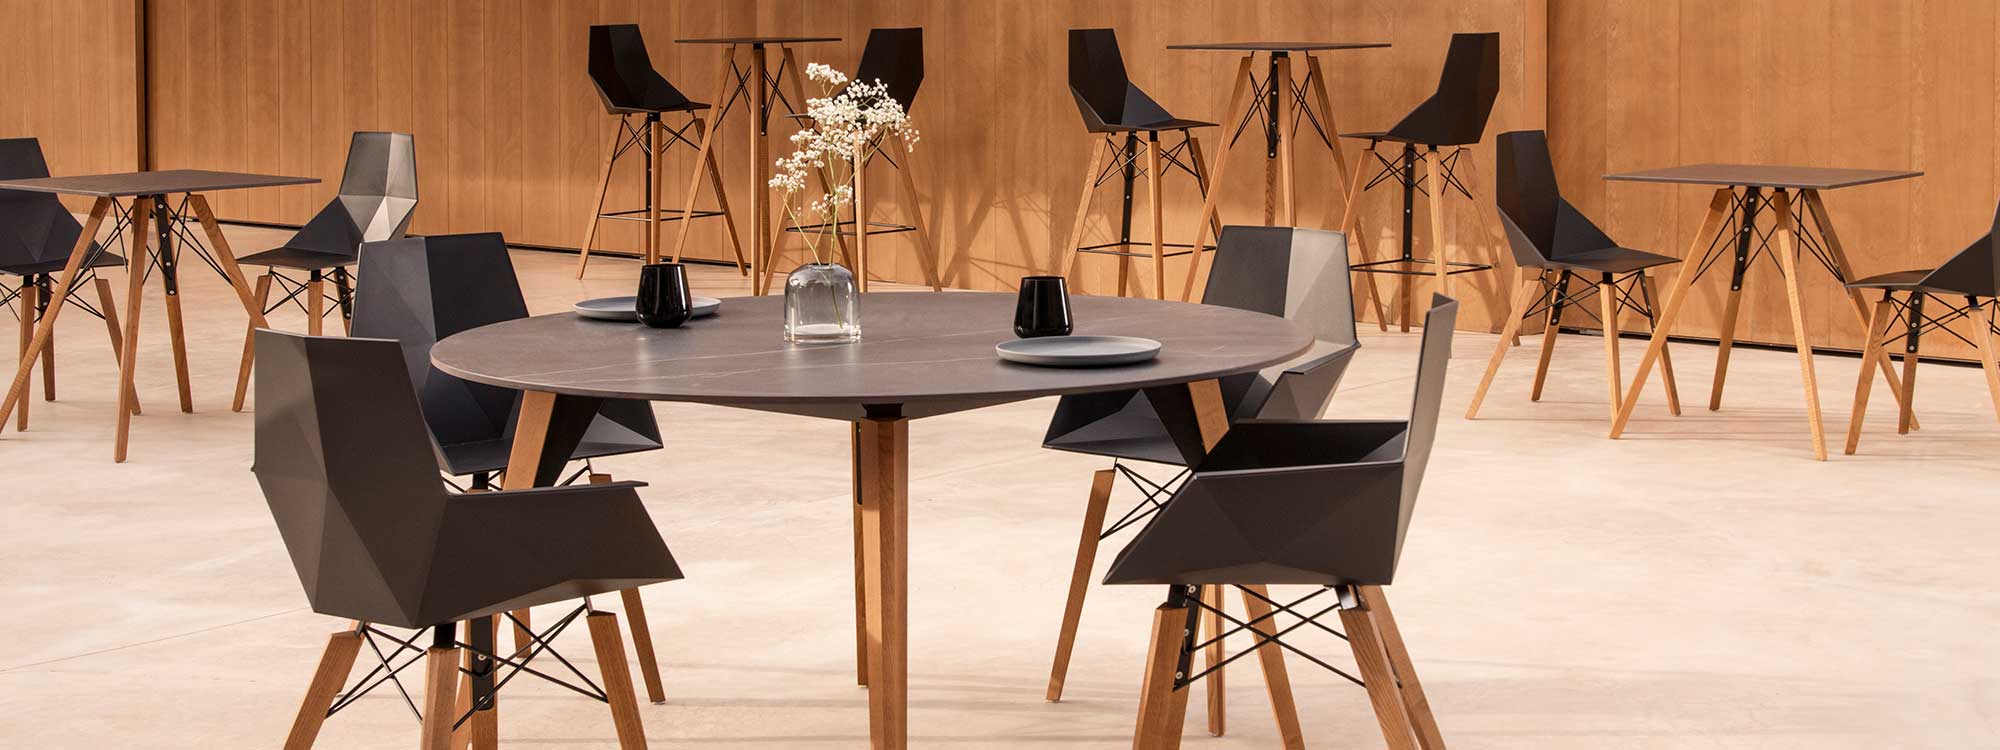 Image of Vondom Faz Wood minimalist dining table and chairs with beech legs and black surfaces